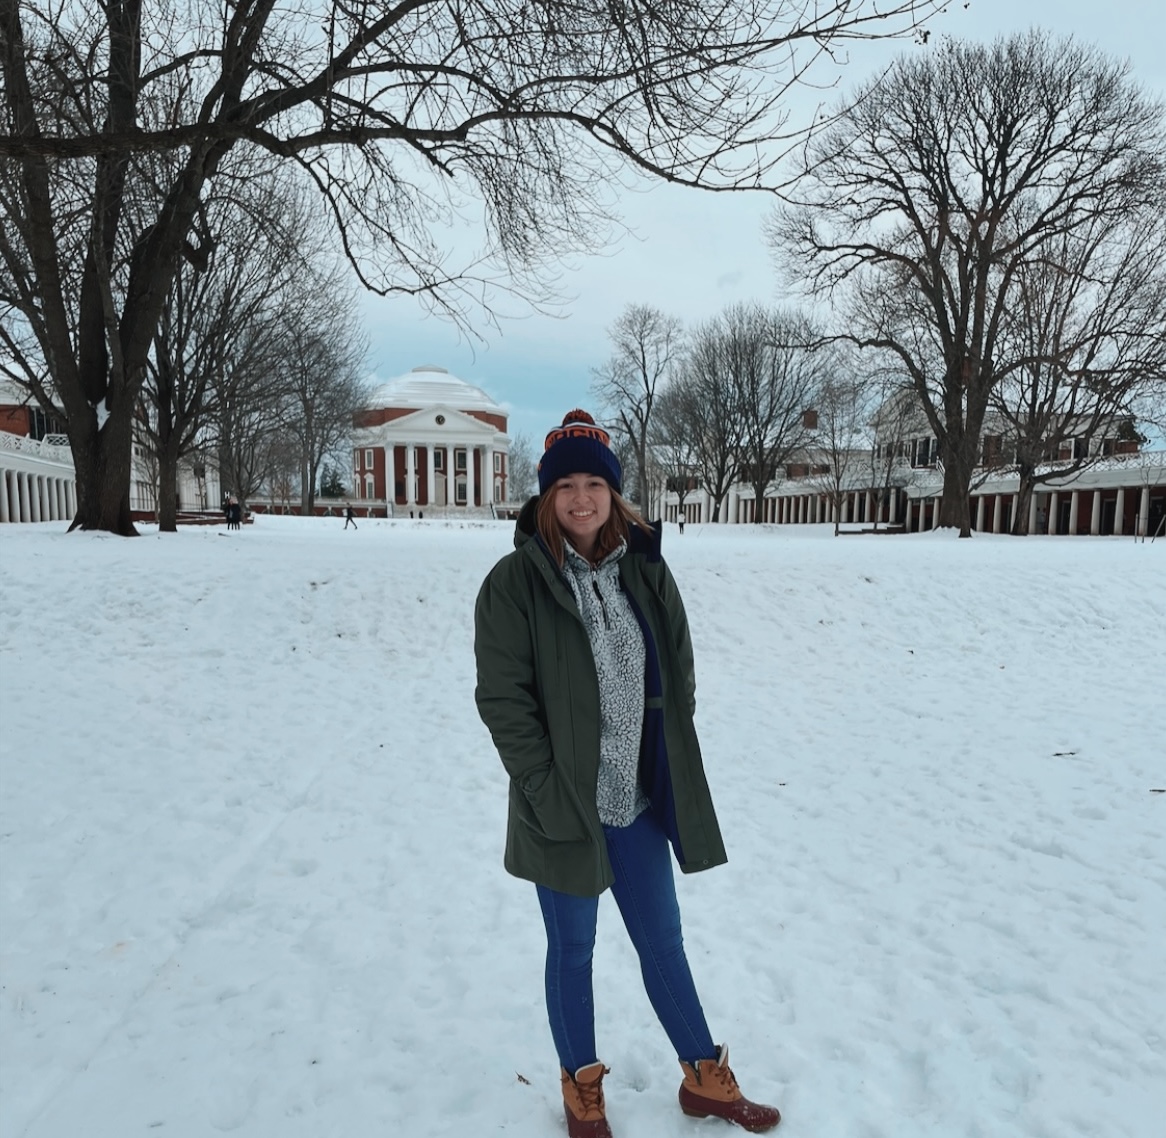 Leah standing on the lawn on a snowy day with the rotunda in the background